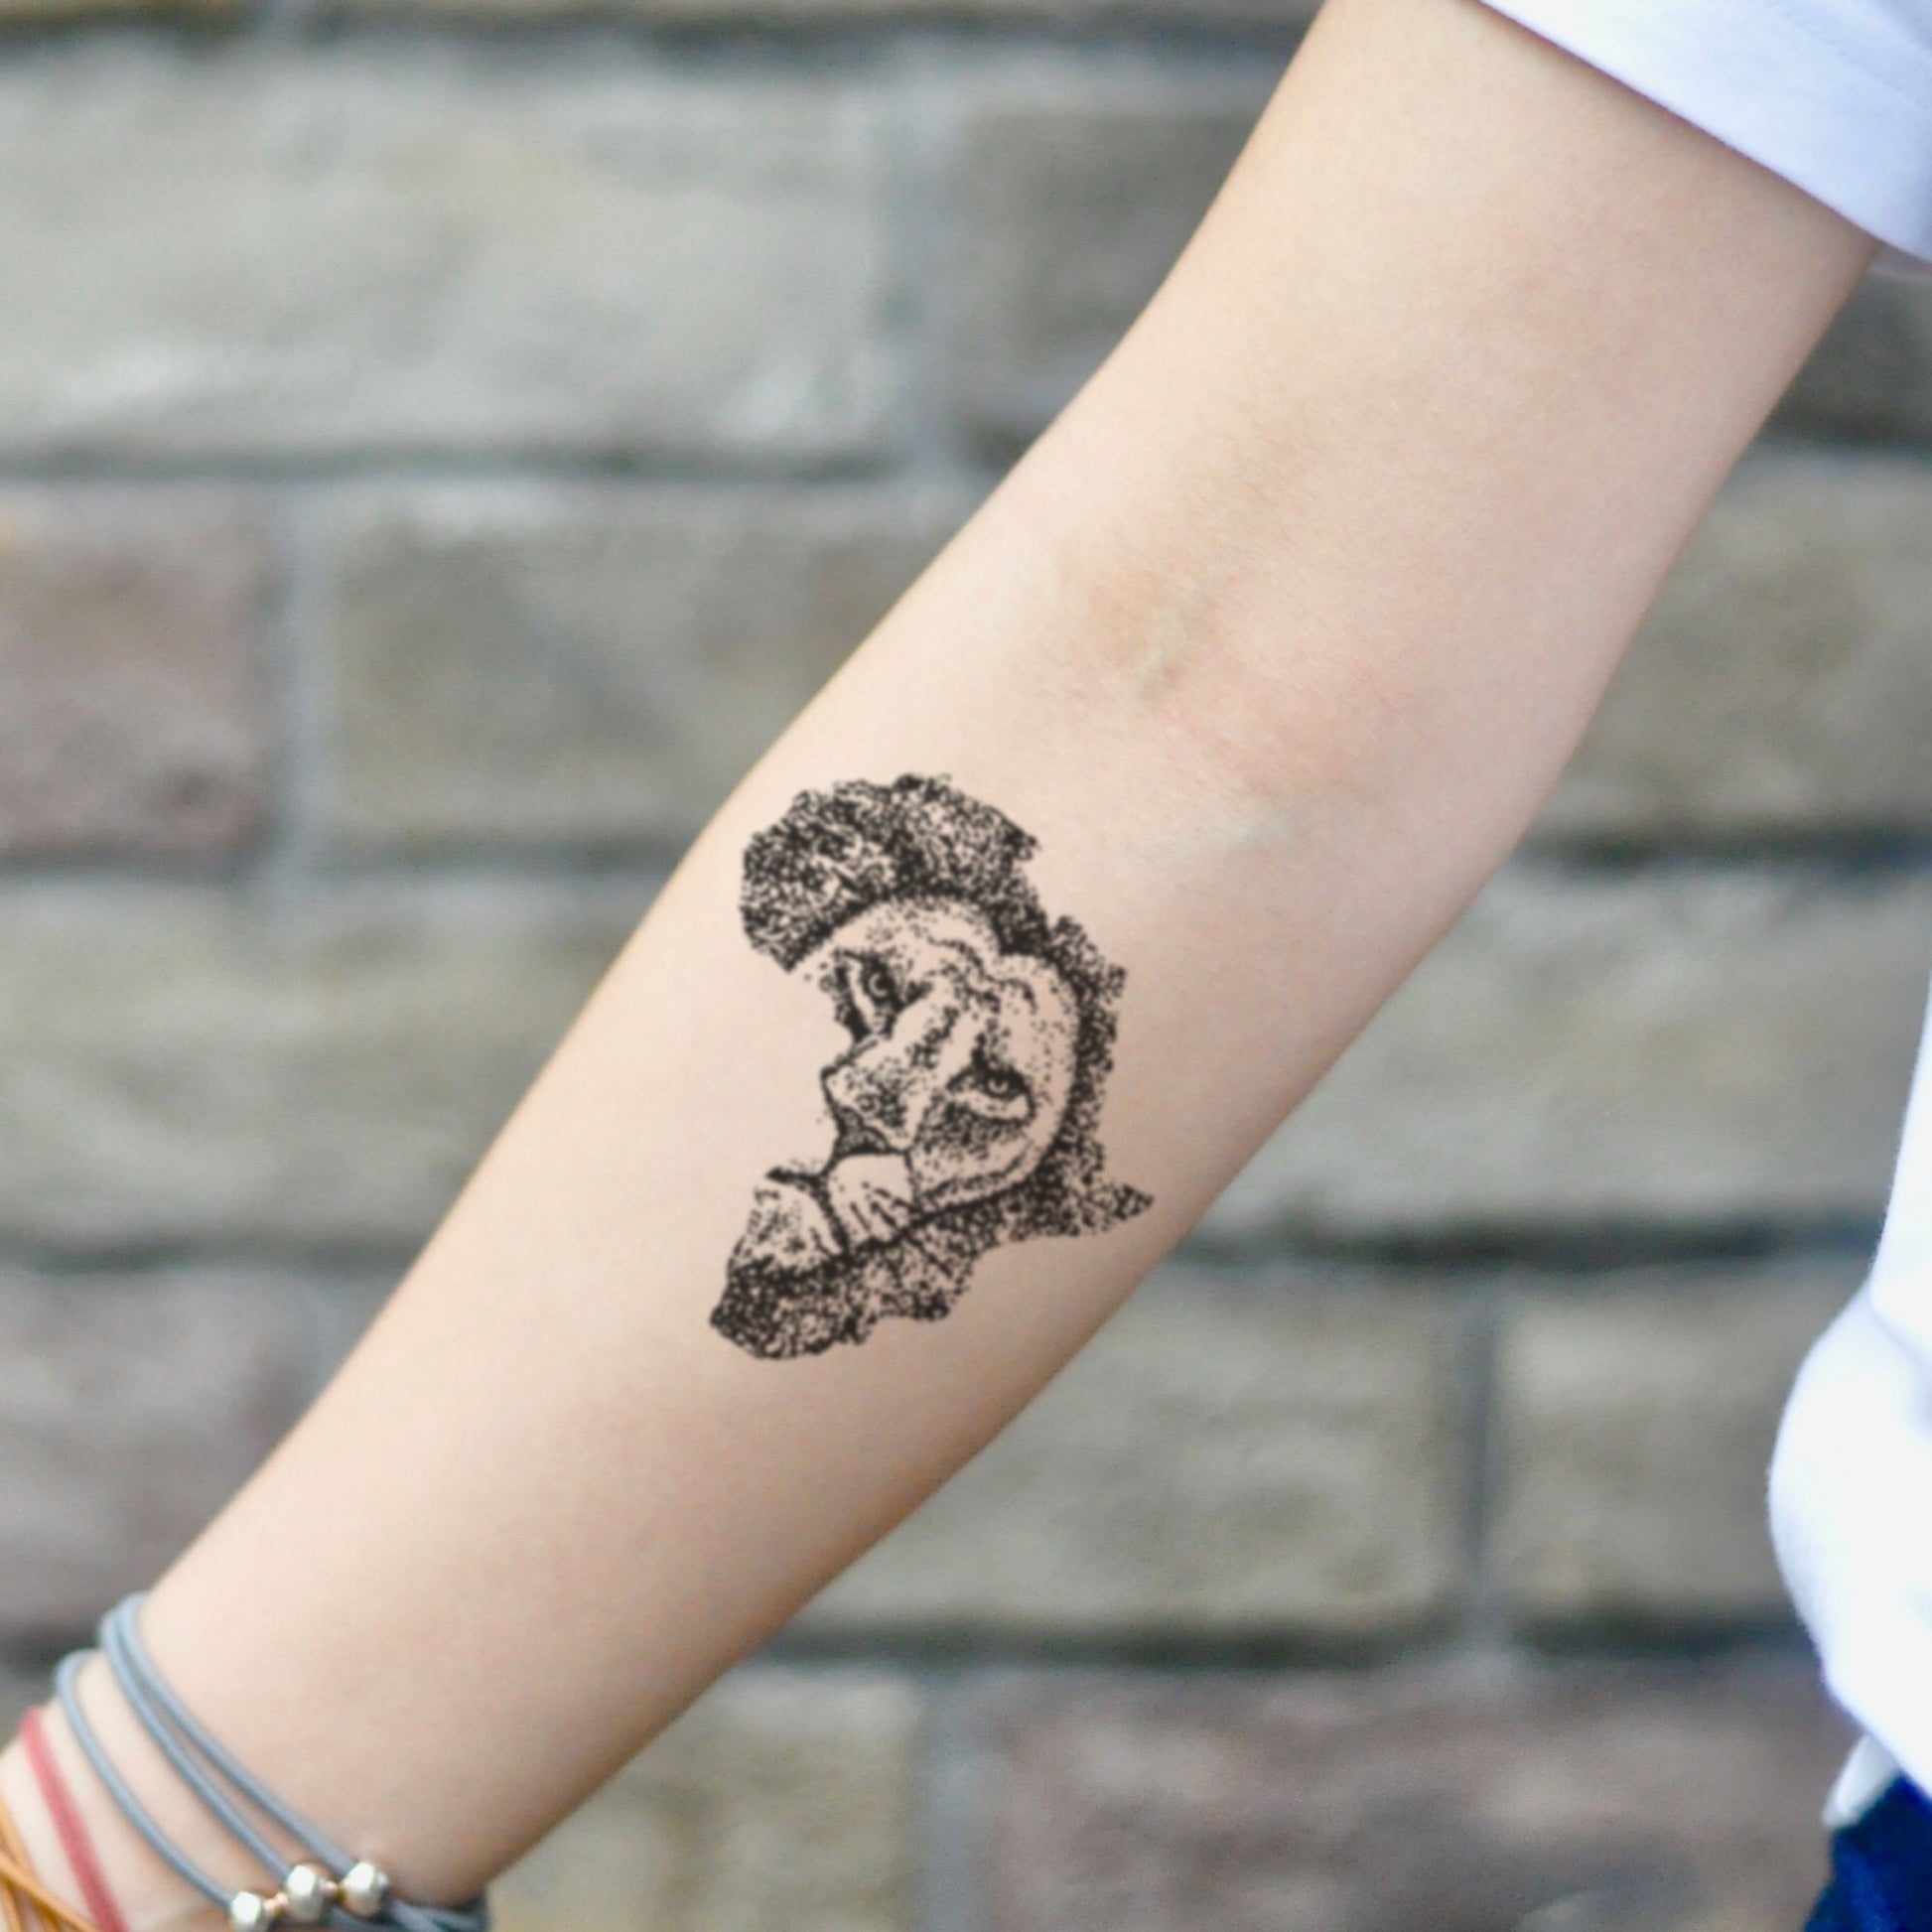 fake small african map lion black culture animal temporary tattoo sticker design idea on inner arm